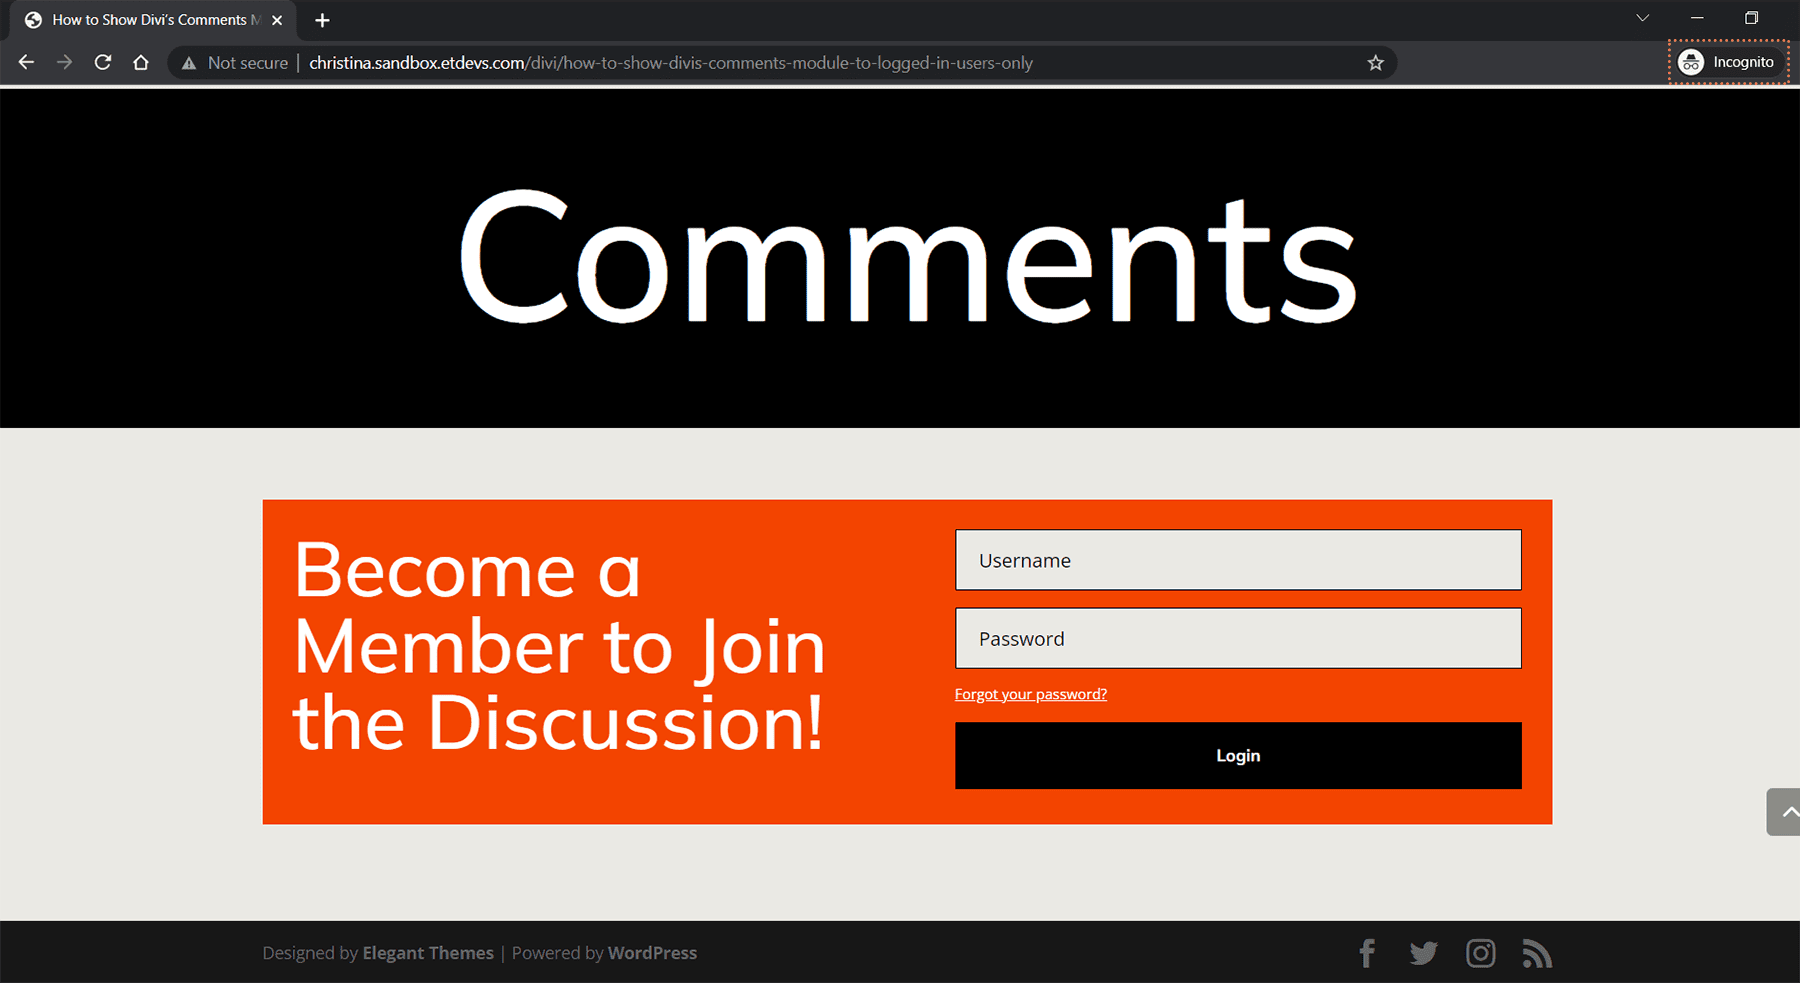 Our members only comment section in a private browser